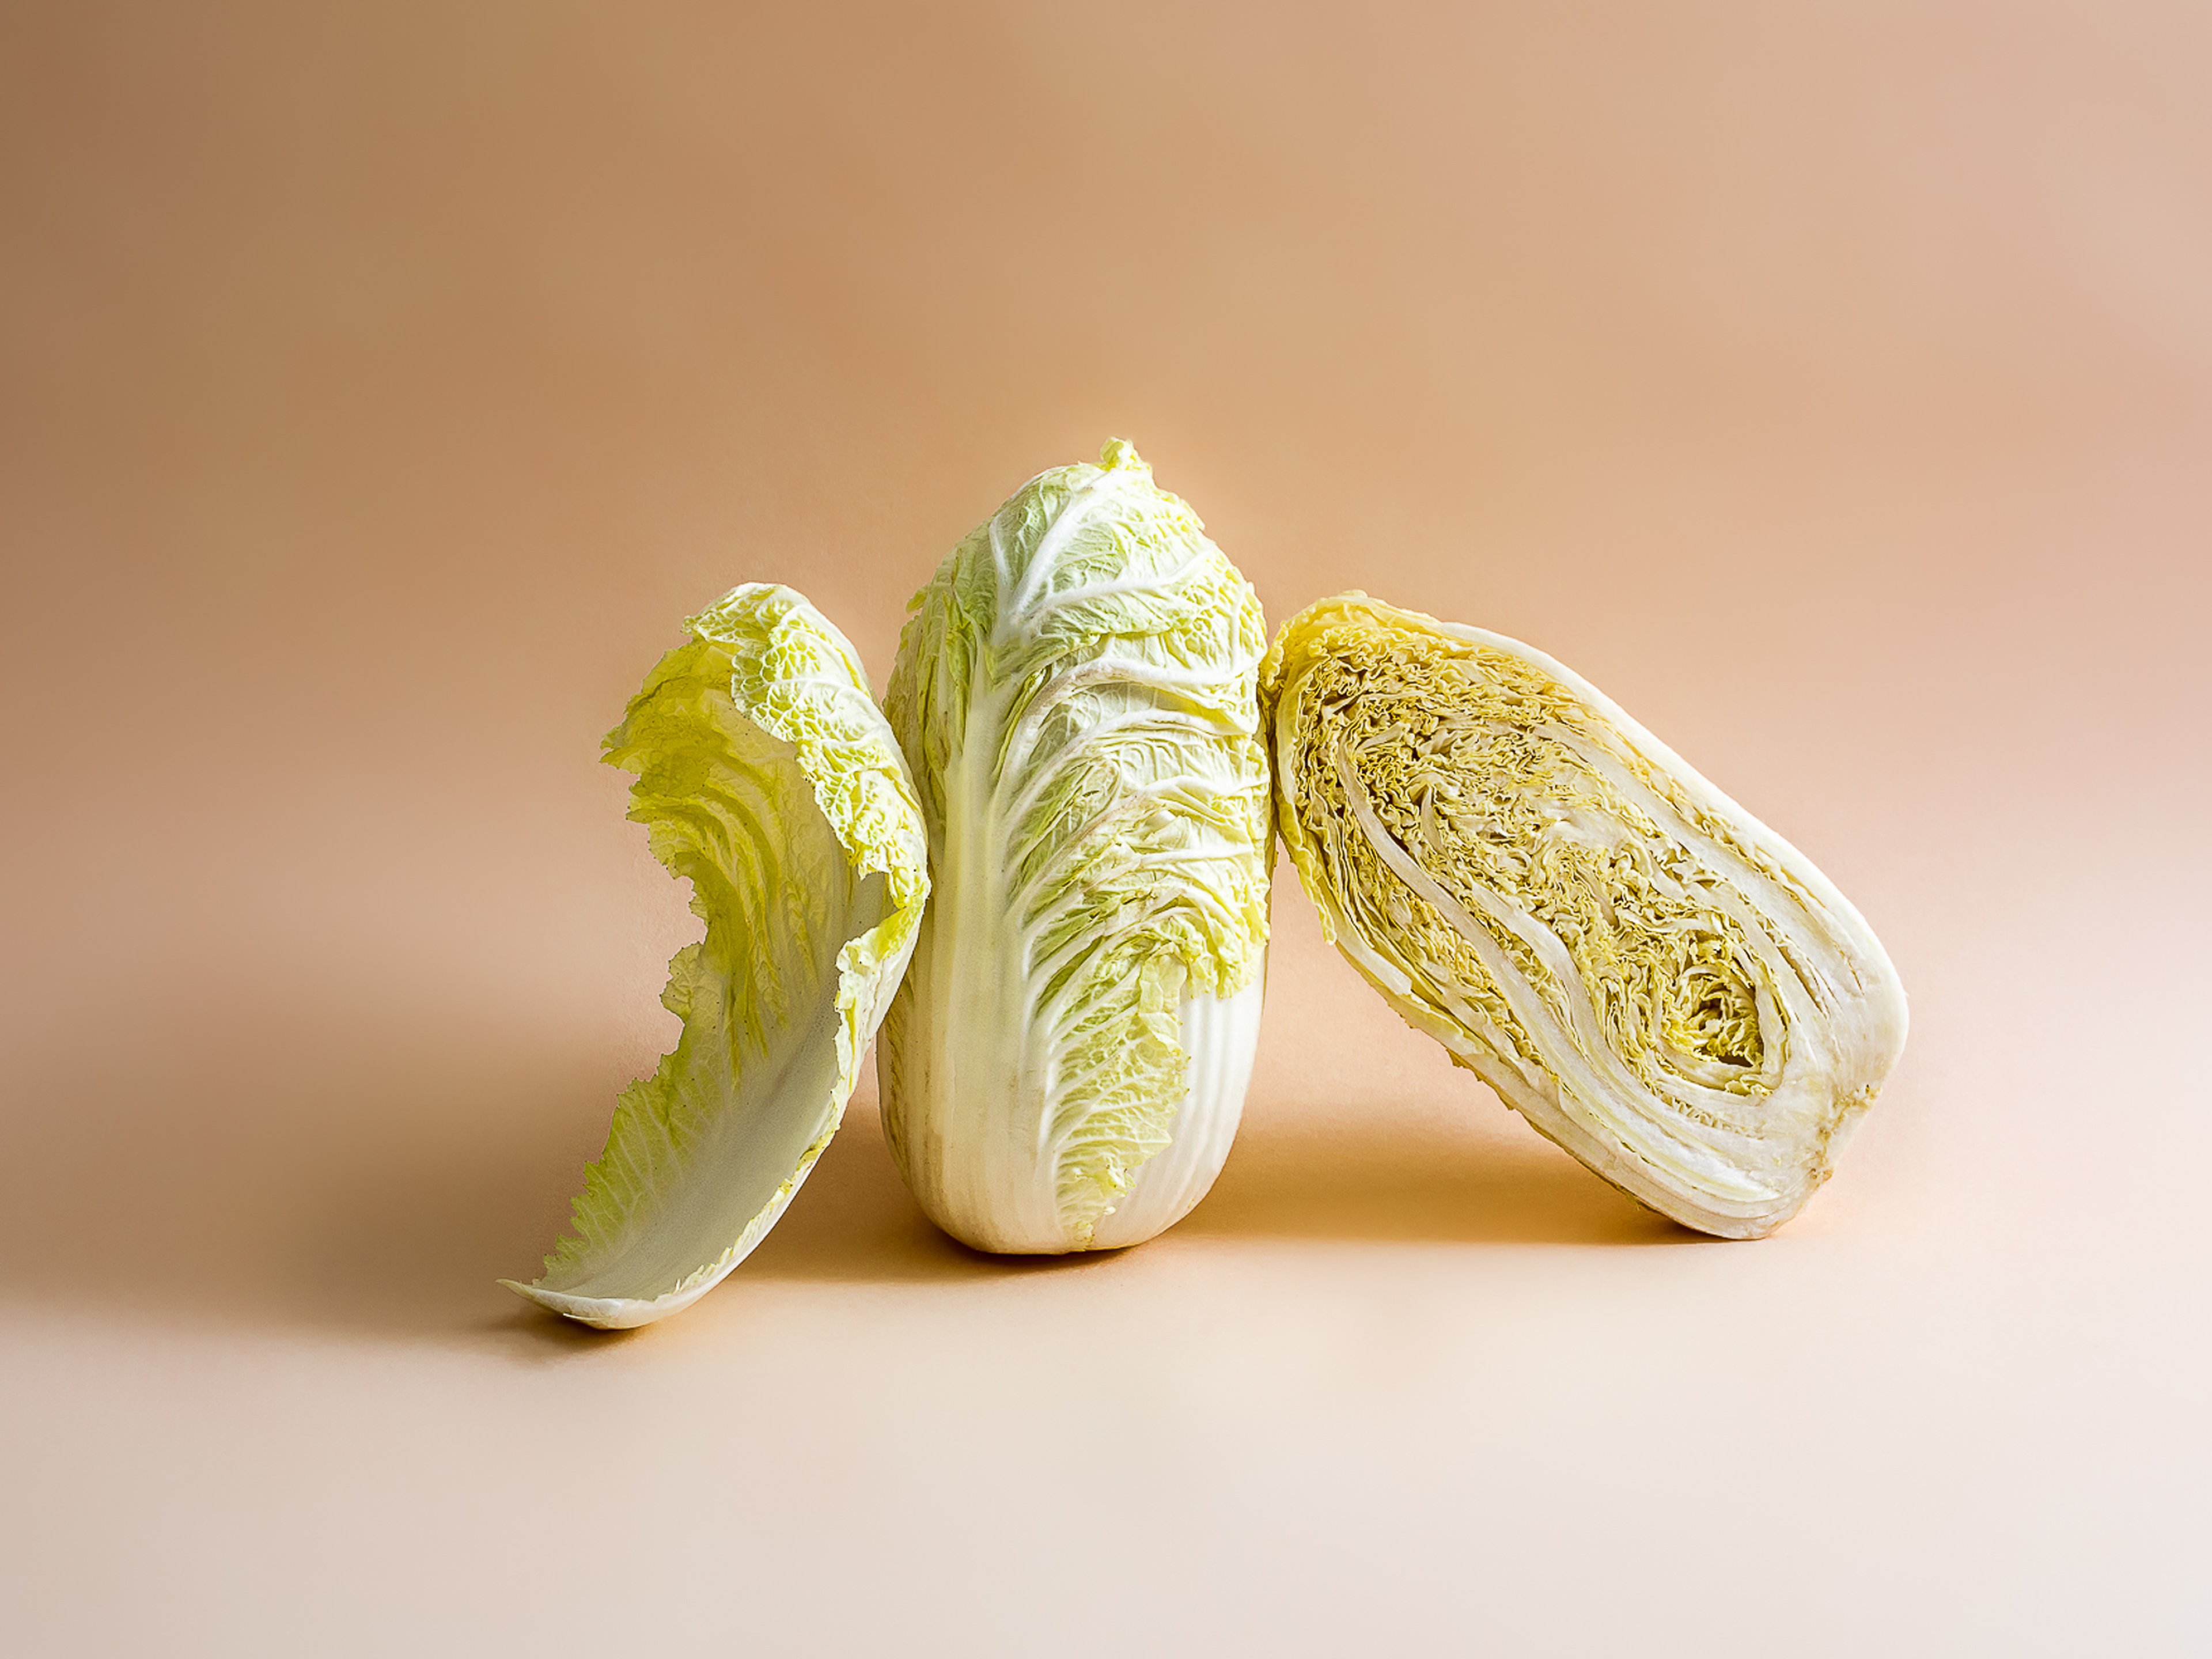 Everything You Need to Know About Preparing and Storing Napa Cabbage